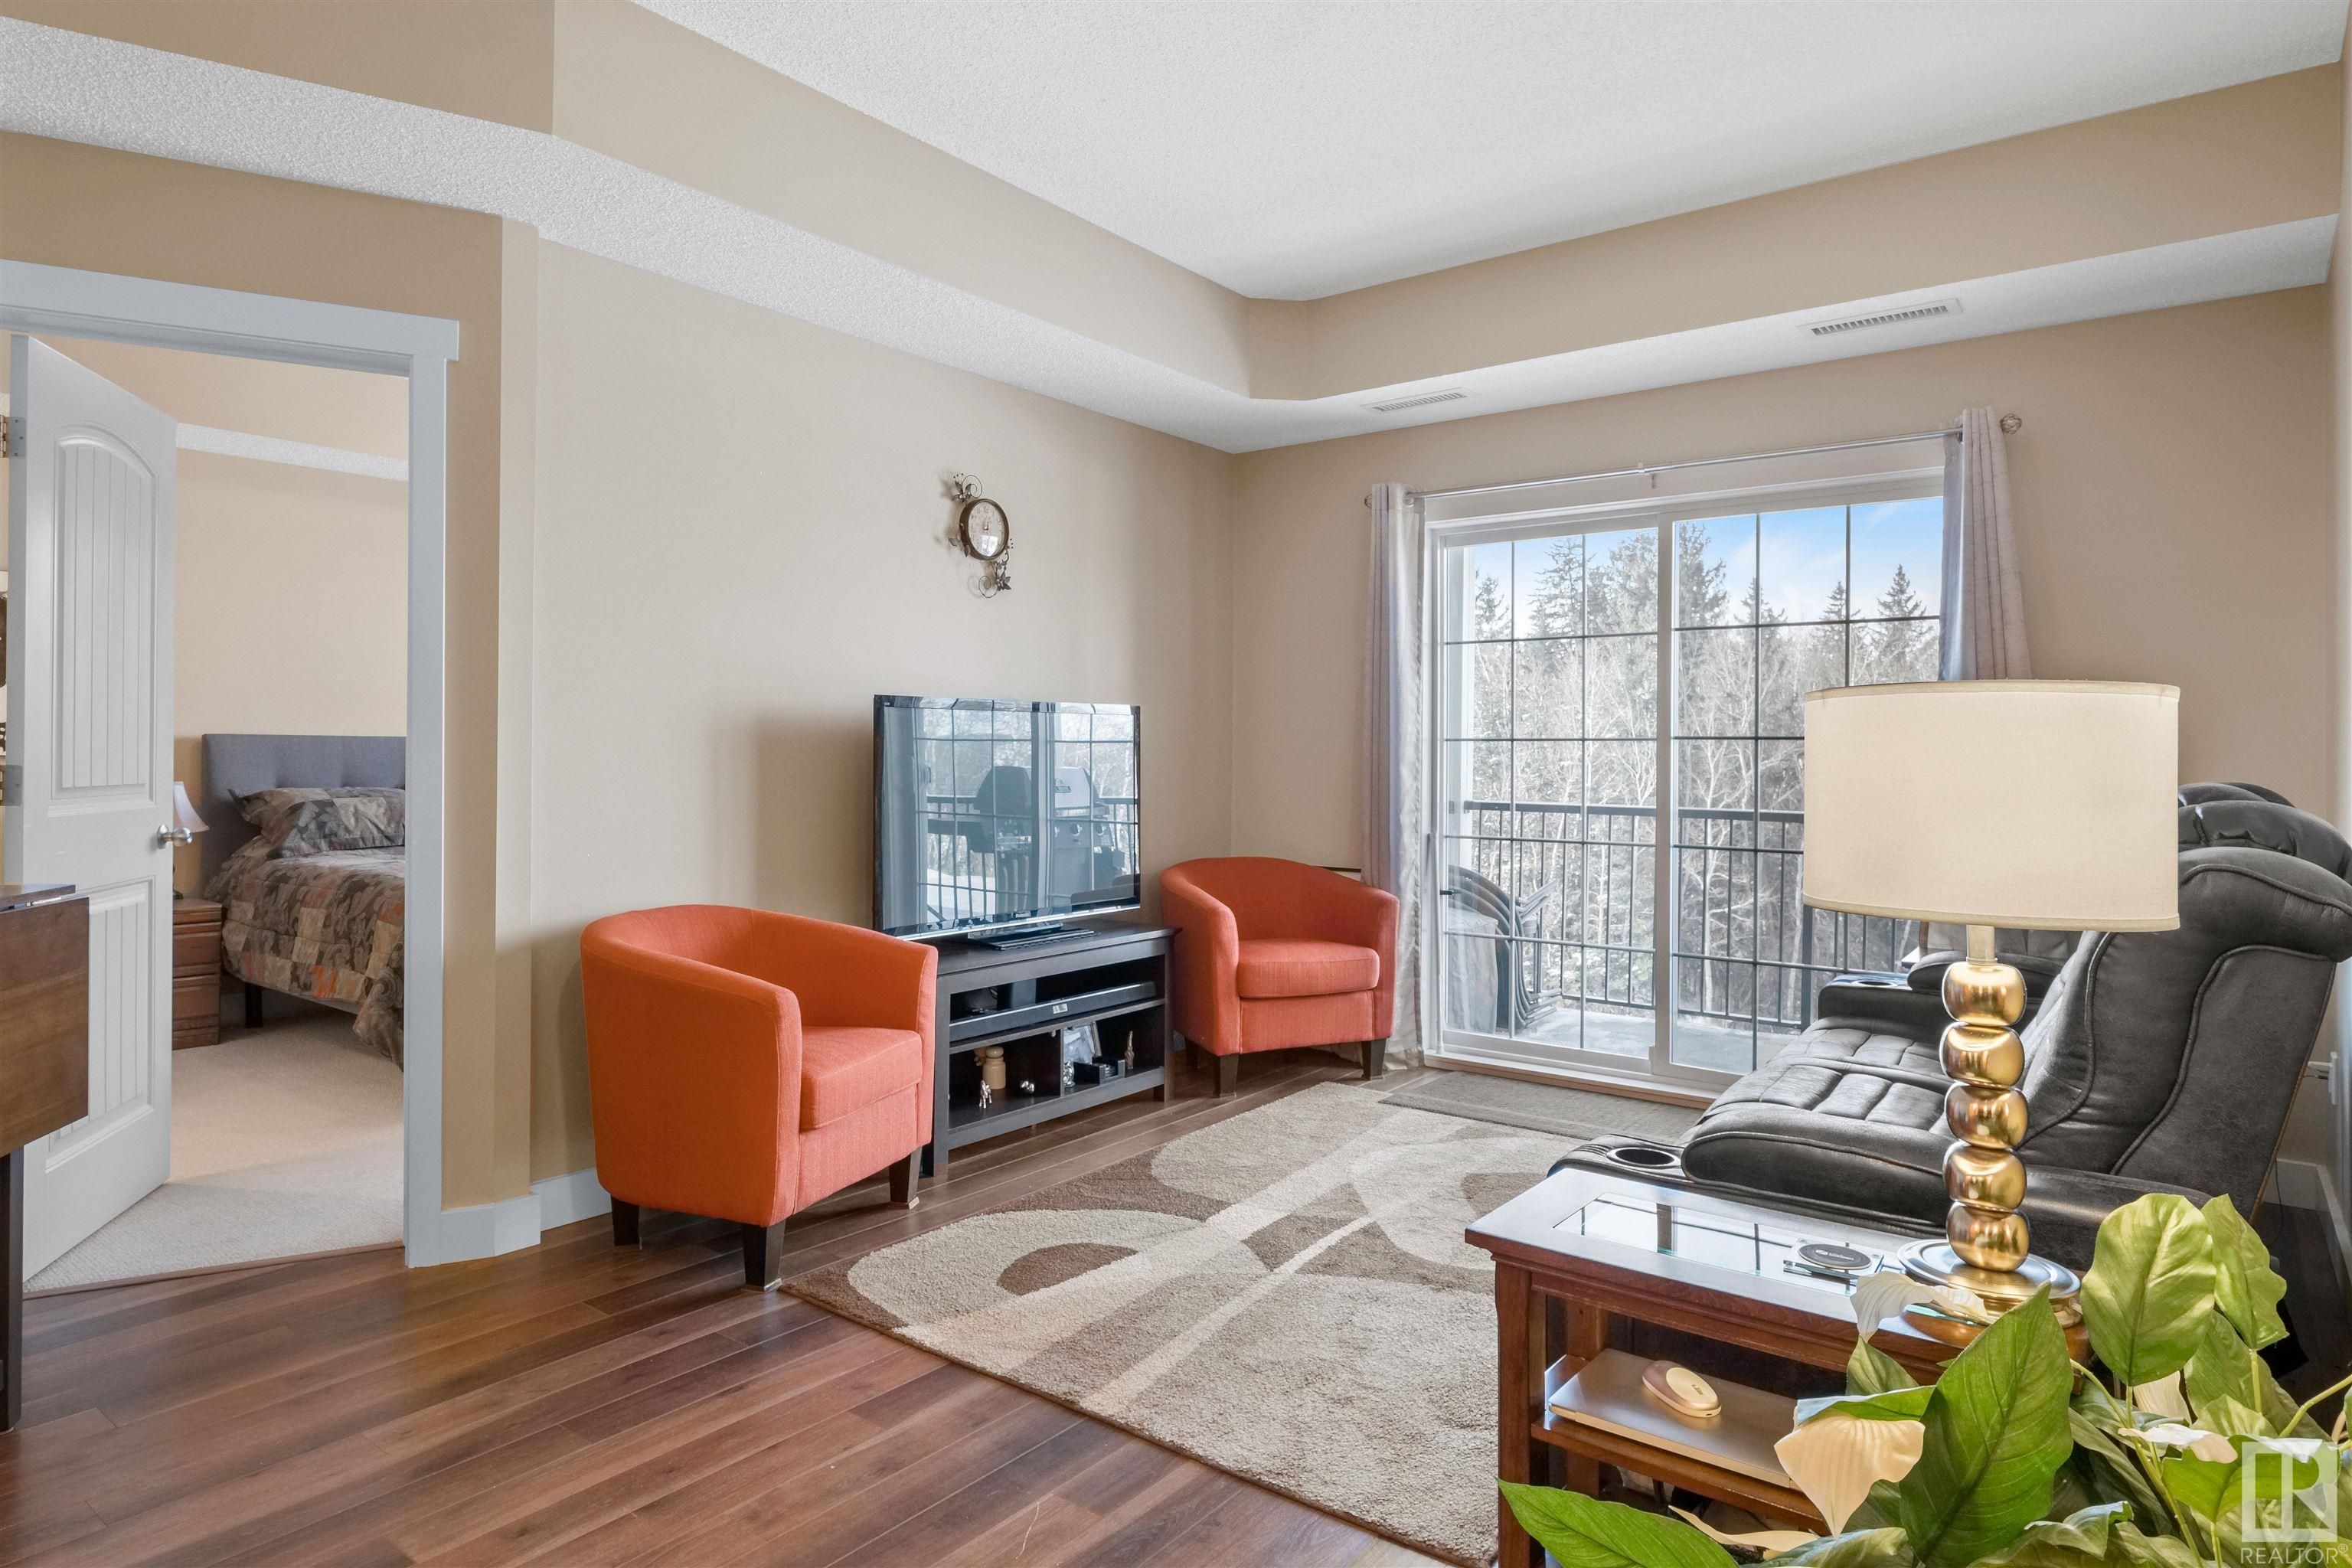 Main Photo: 104 4922 52 Street NW: Gibbons Condo for sale : MLS®# E4275214